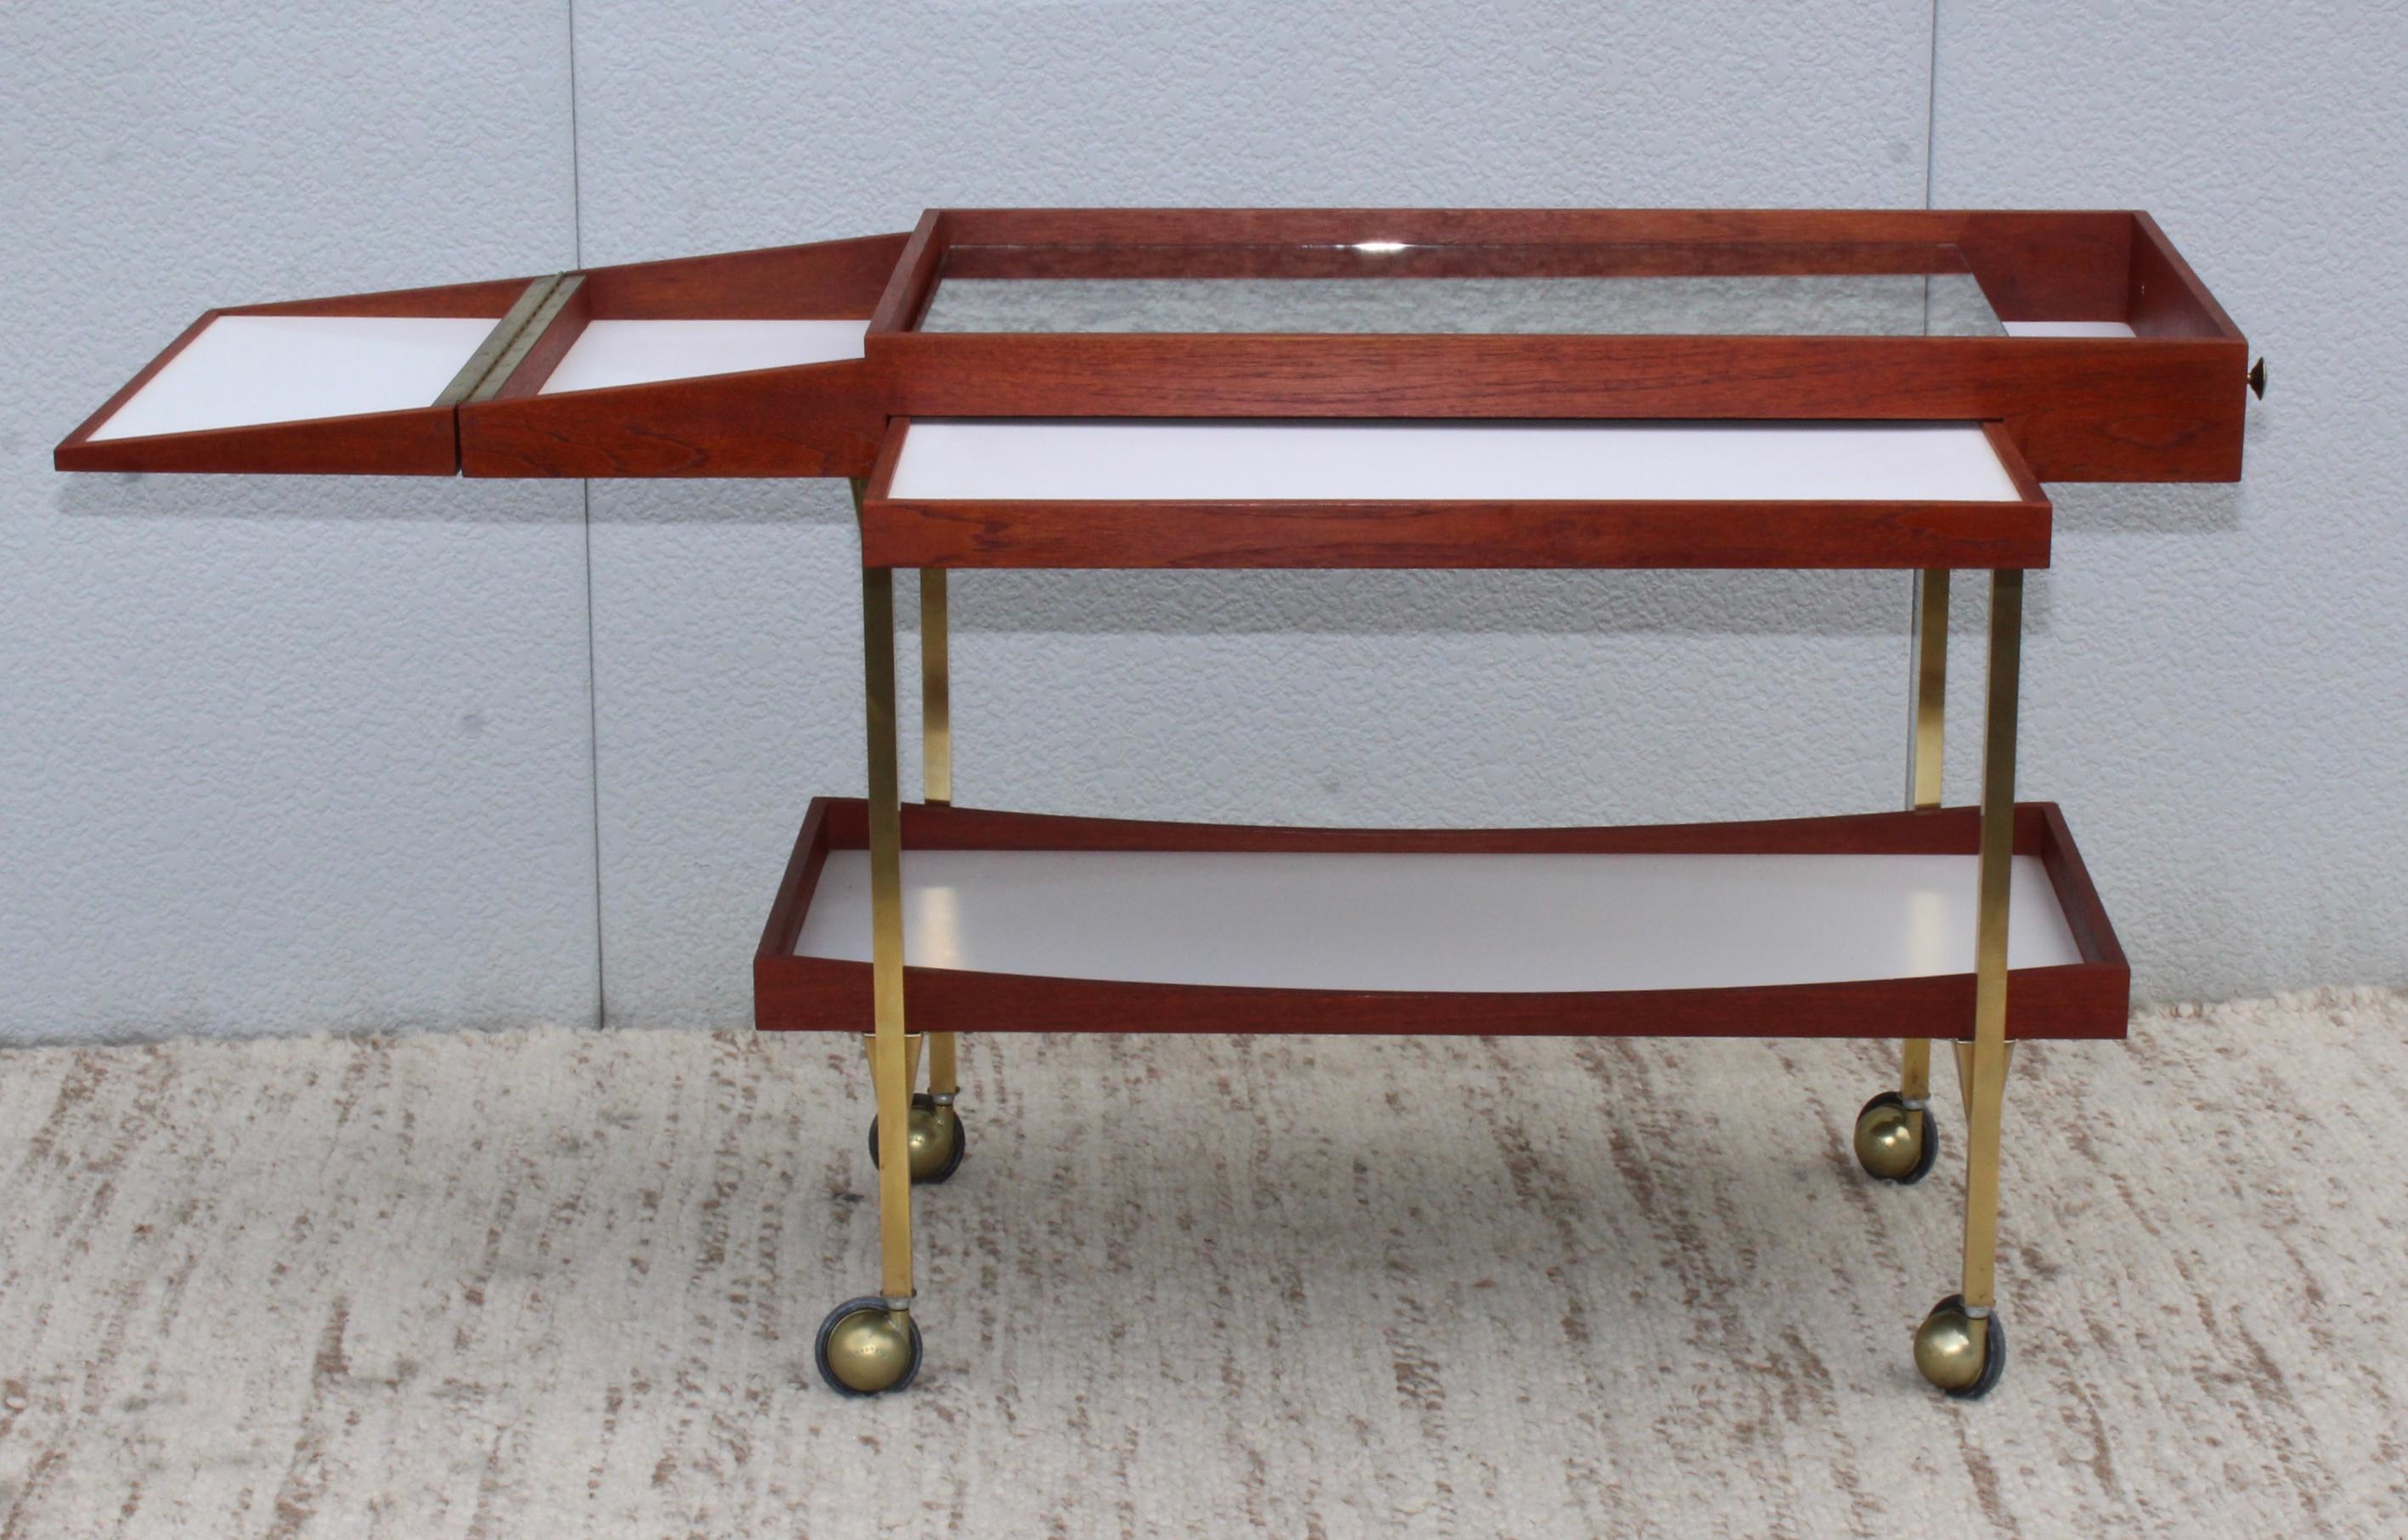 1960s Mid-Century Modern brass and walnut with antique mirror top bar cart in the style of Paul McCobb.

Length when fully open 55''.